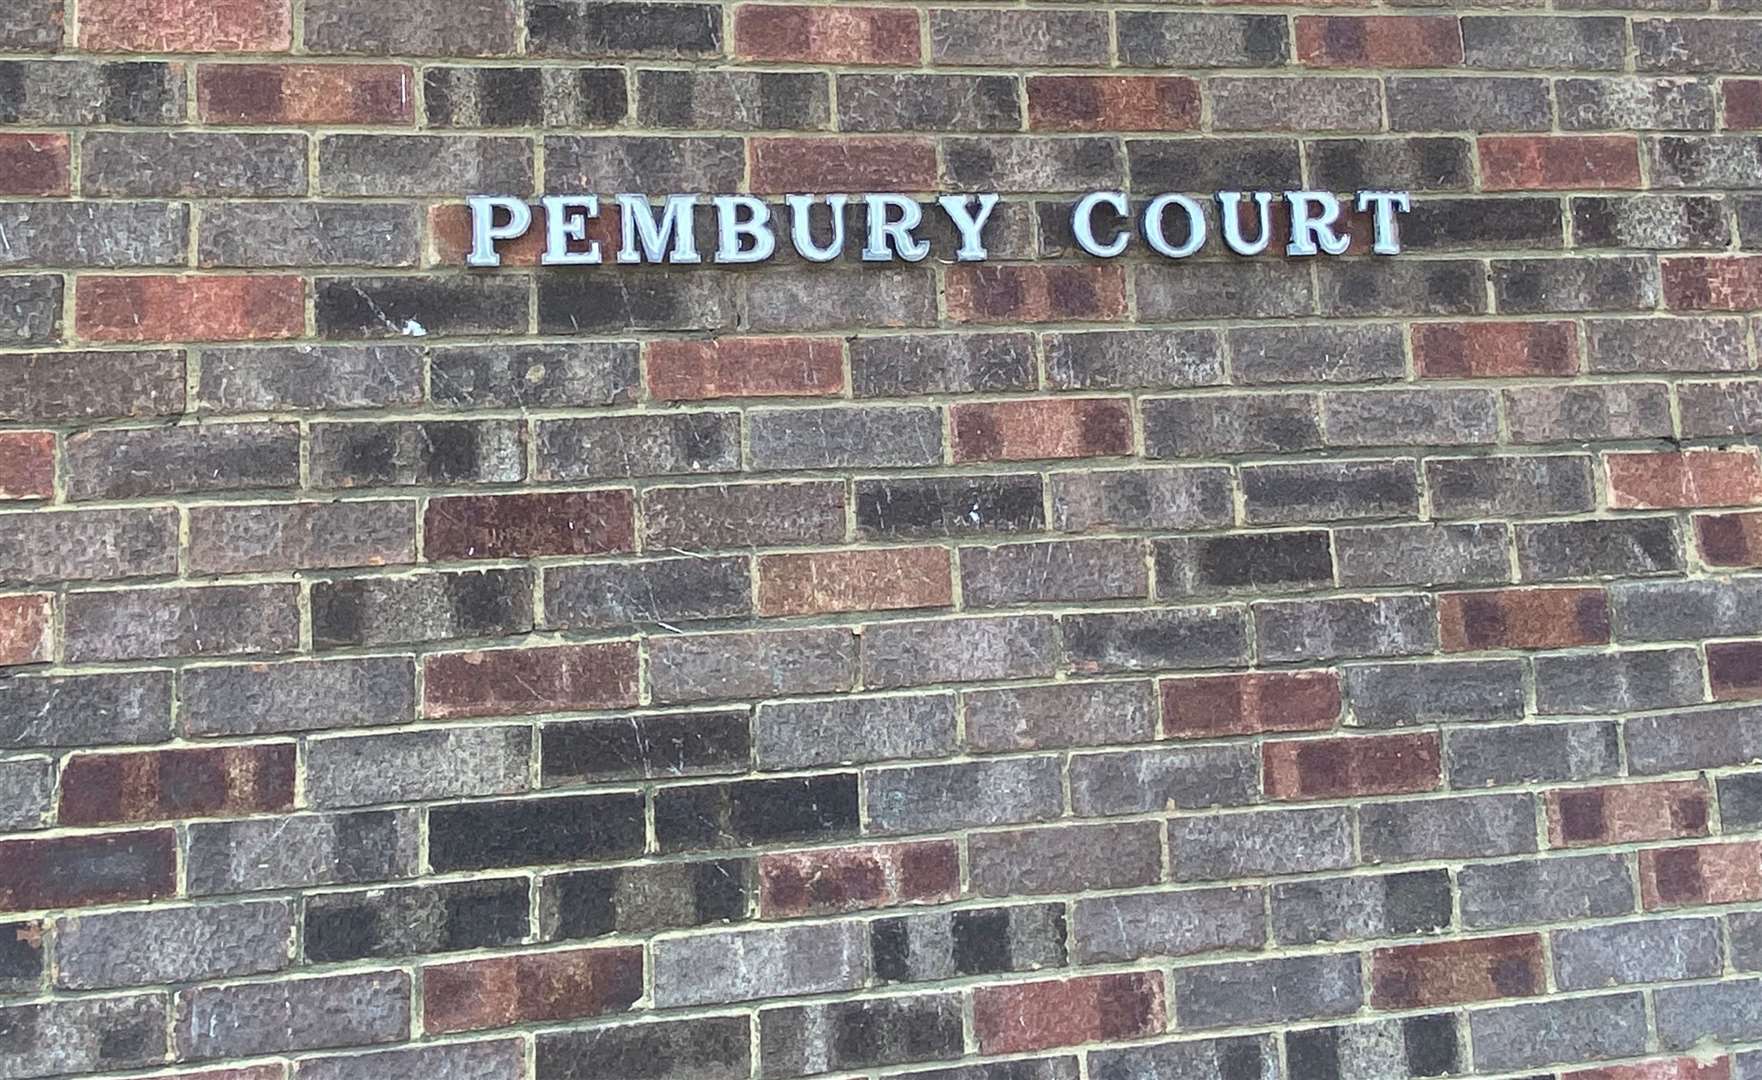 More than 30 extra flats could be added to Pembury Court in Sittingbourne